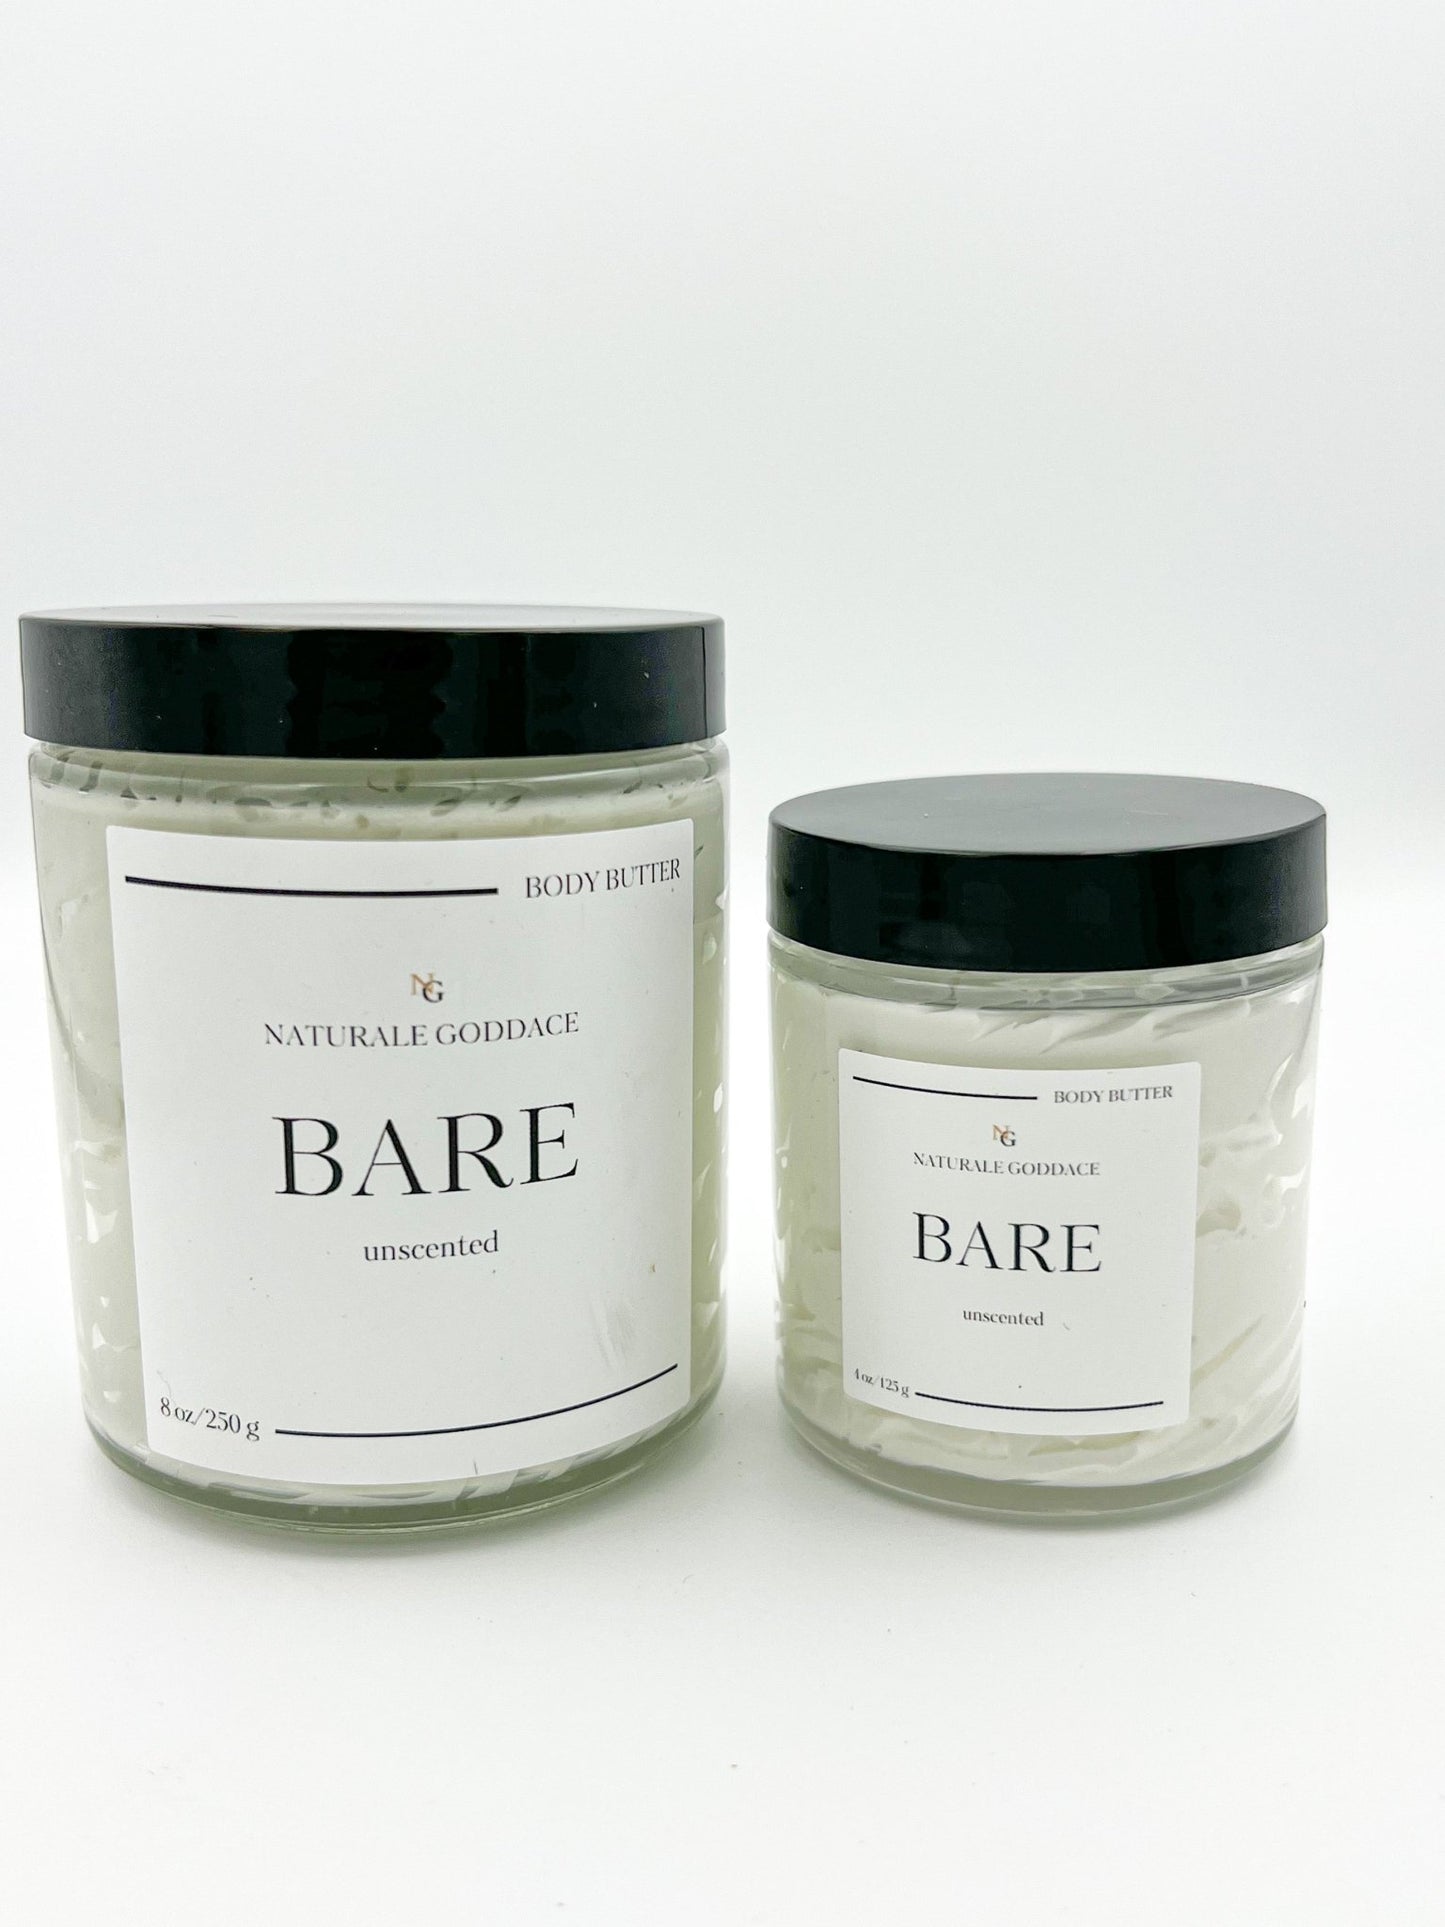 Bare Body Butter - Naturale Goddace | Clean + simple skincare-Whipped Body Butter